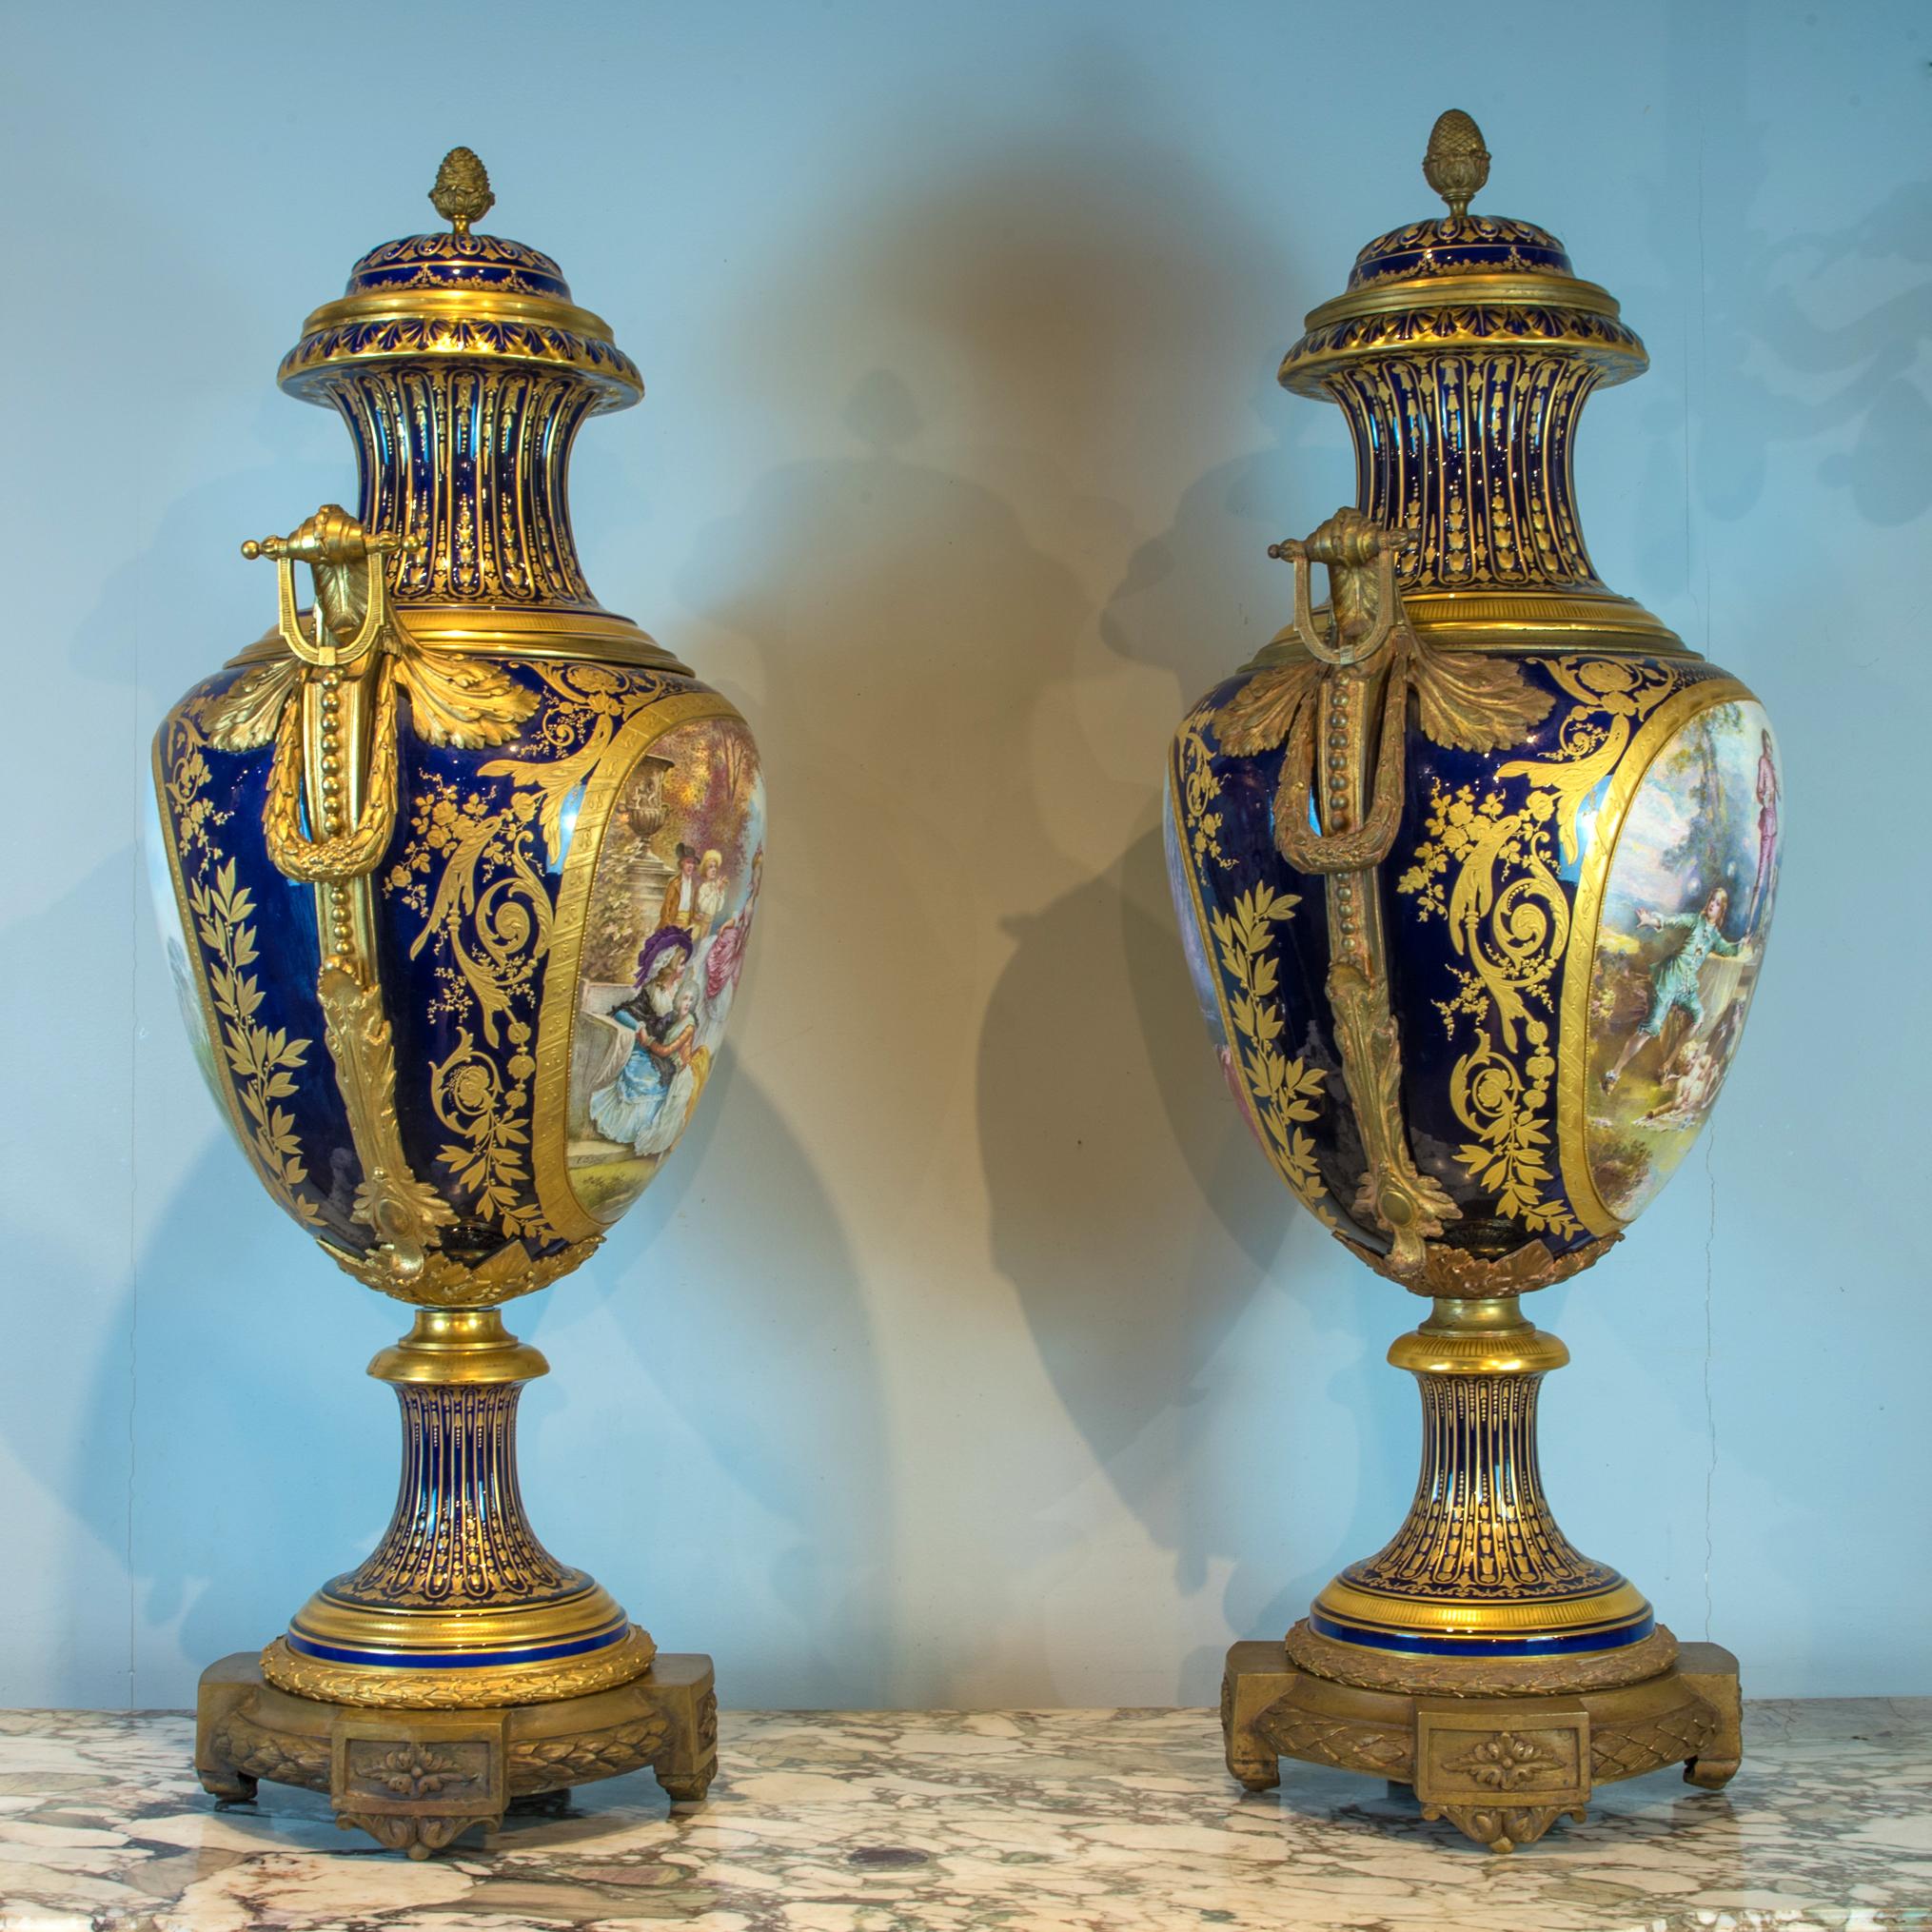 Hand painted with scenes of a chateau landscape and courtly couples in a garden, signed 'E. Collot', on a gilt and cobalt ground, gilt-bronze acanthus swag handles, base and foliate knopped cover. The other painted reserve in the Rococo manner,